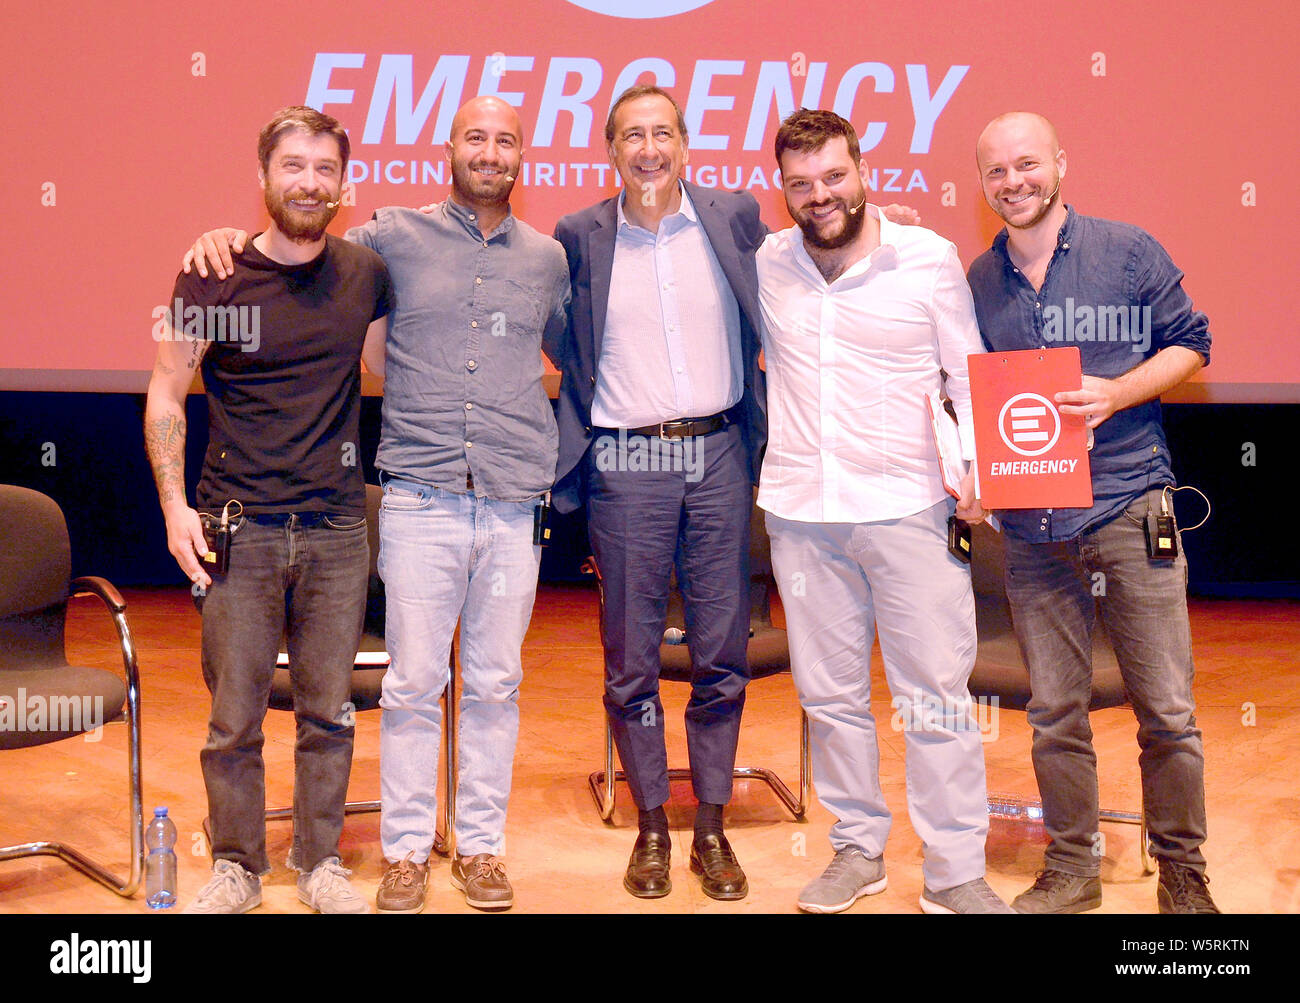 Mayor of Milan Giuseppe Sala attends a meeting at the Teatro Dal Verme in Milan, Italy, celebrating the 25th anniversary of Emergency, a humanitarian NGO providing free medical treatment to the victims of war and poverty. Featuring: Giuseppe Sala, Il Quinto Segreto di Satira Where: Milan, Lombardy, Italy When: 29 Jun 2019 Credit: IPA/WENN.com  **Only available for publication in UK, USA, Germany, Austria, Switzerland** Stock Photo